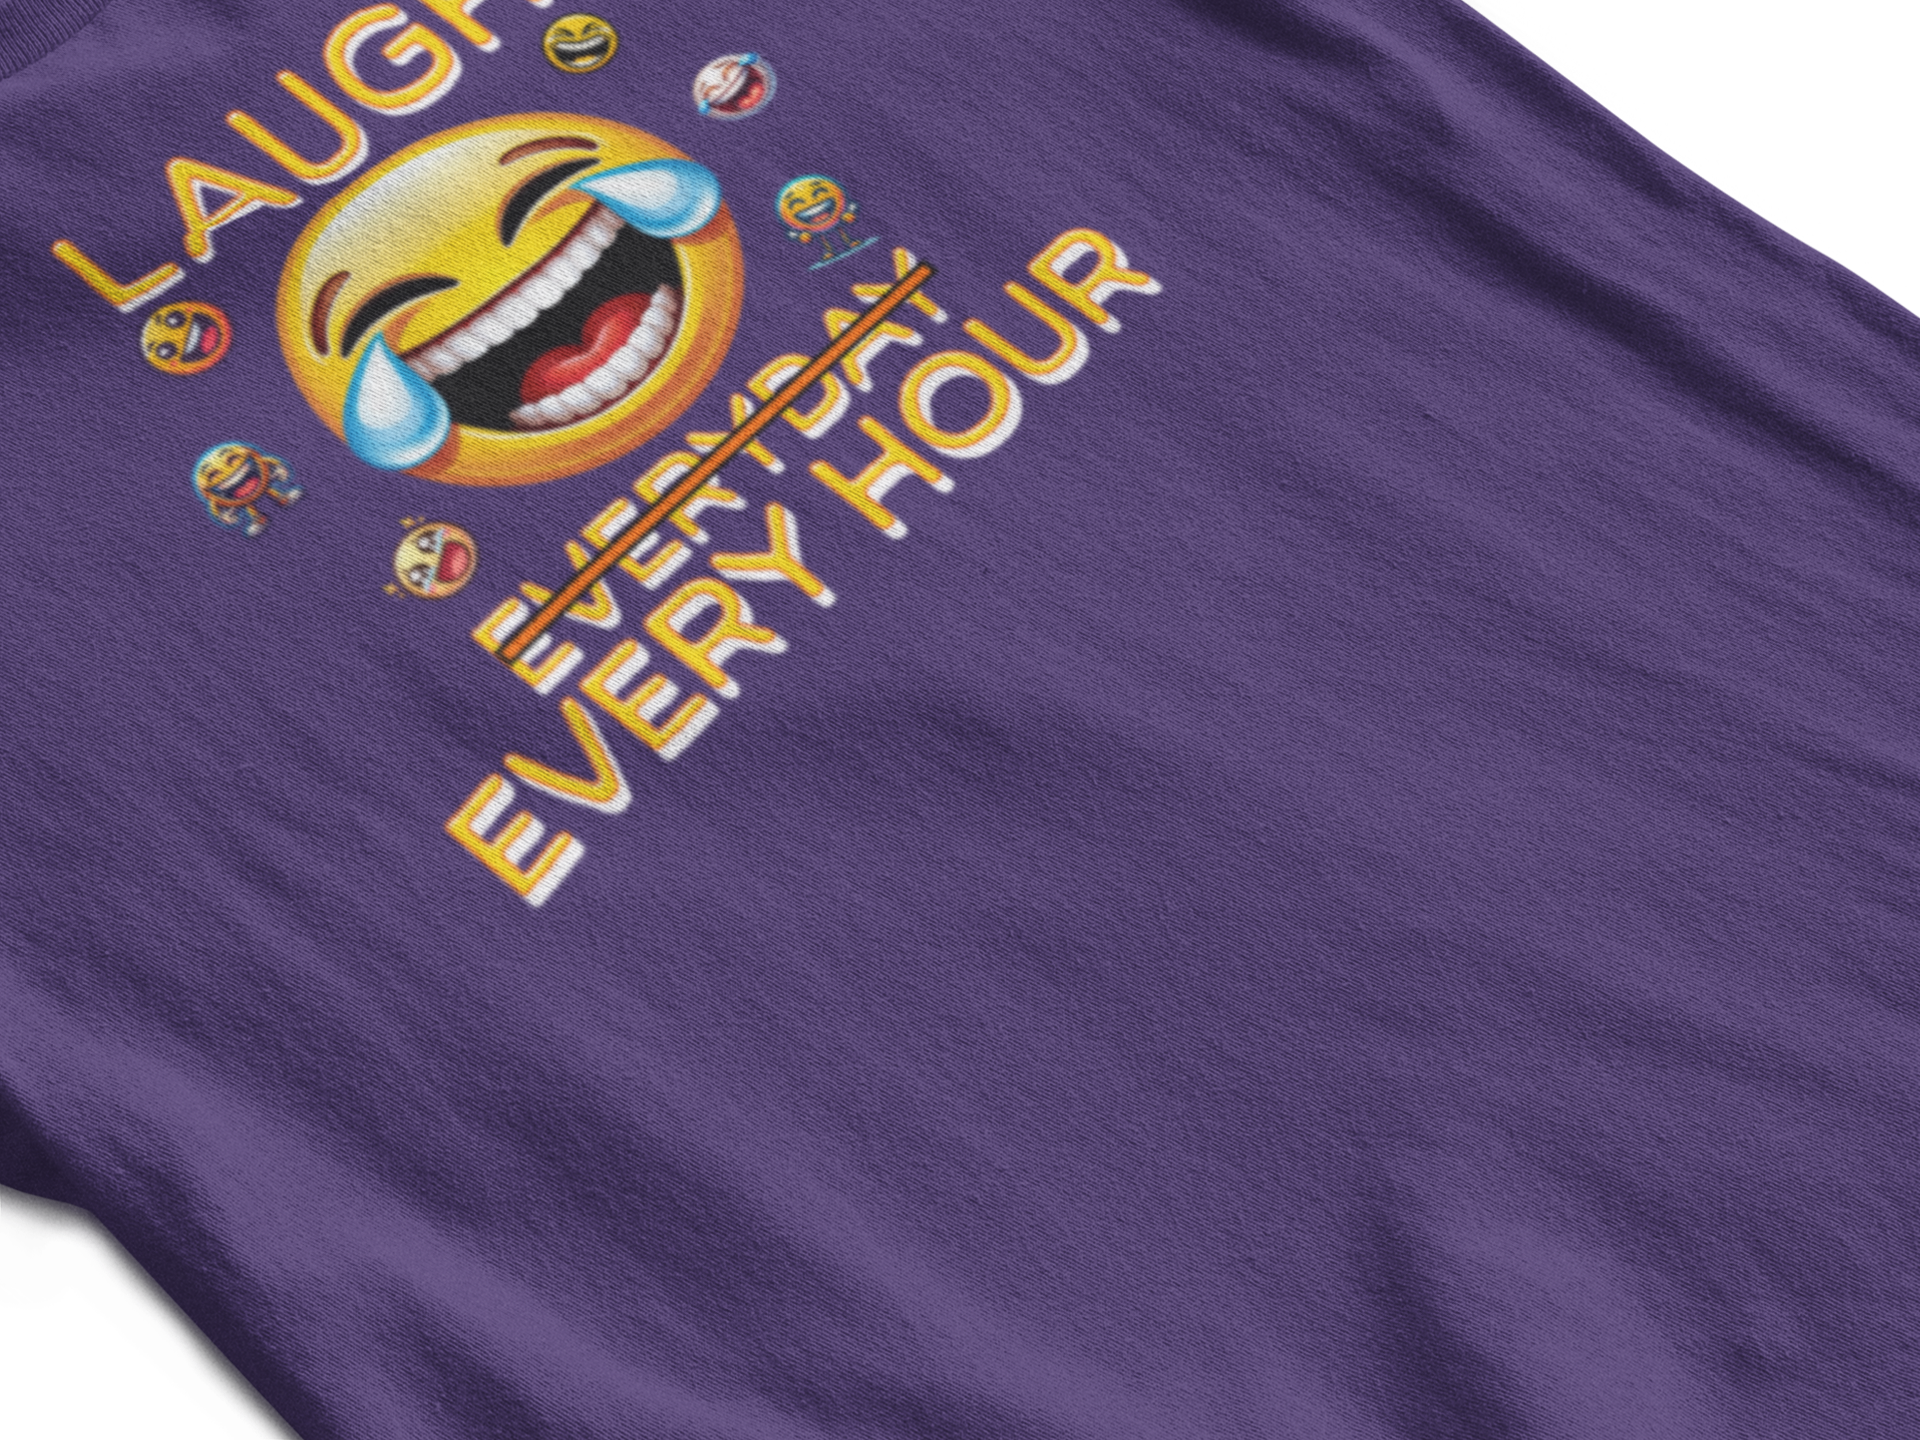 Laugh Every Hour Smiley Face Humorous Good Mood T-Shirt